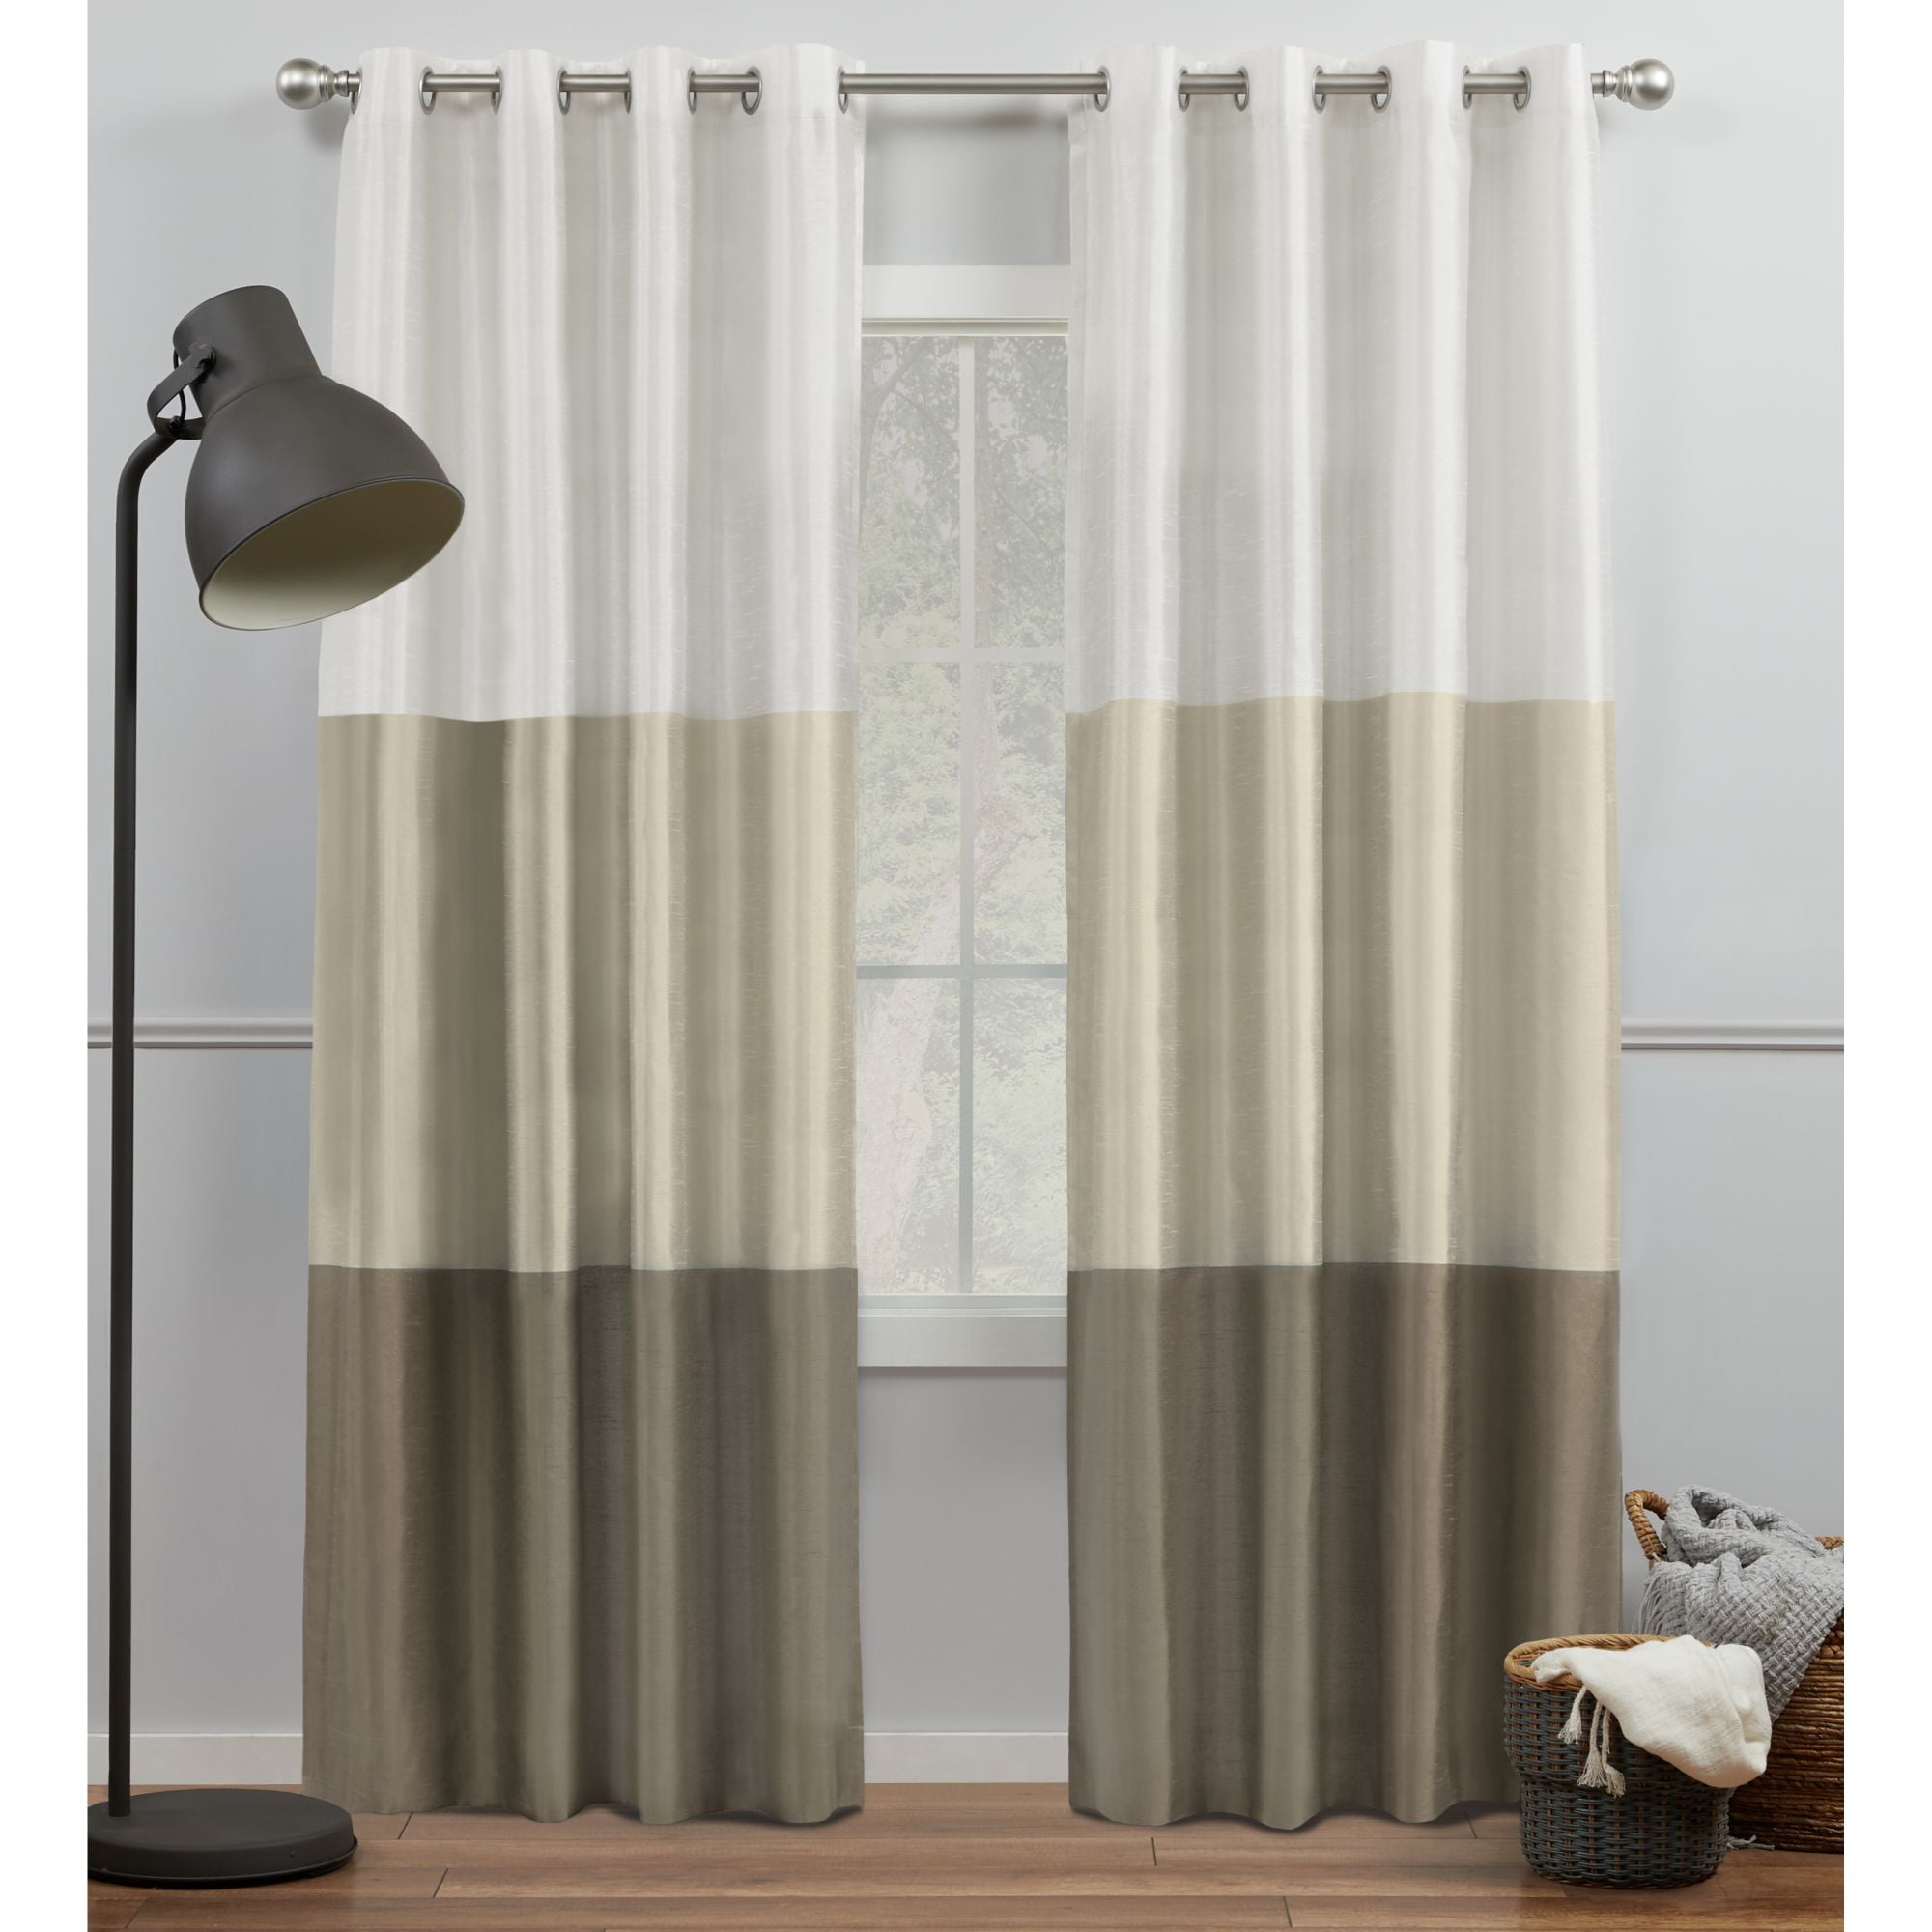 84" LONG WINDOW CURTAIN PANEL SET OF 4 FAUX SILK GROMMET TOP CURTAINS 